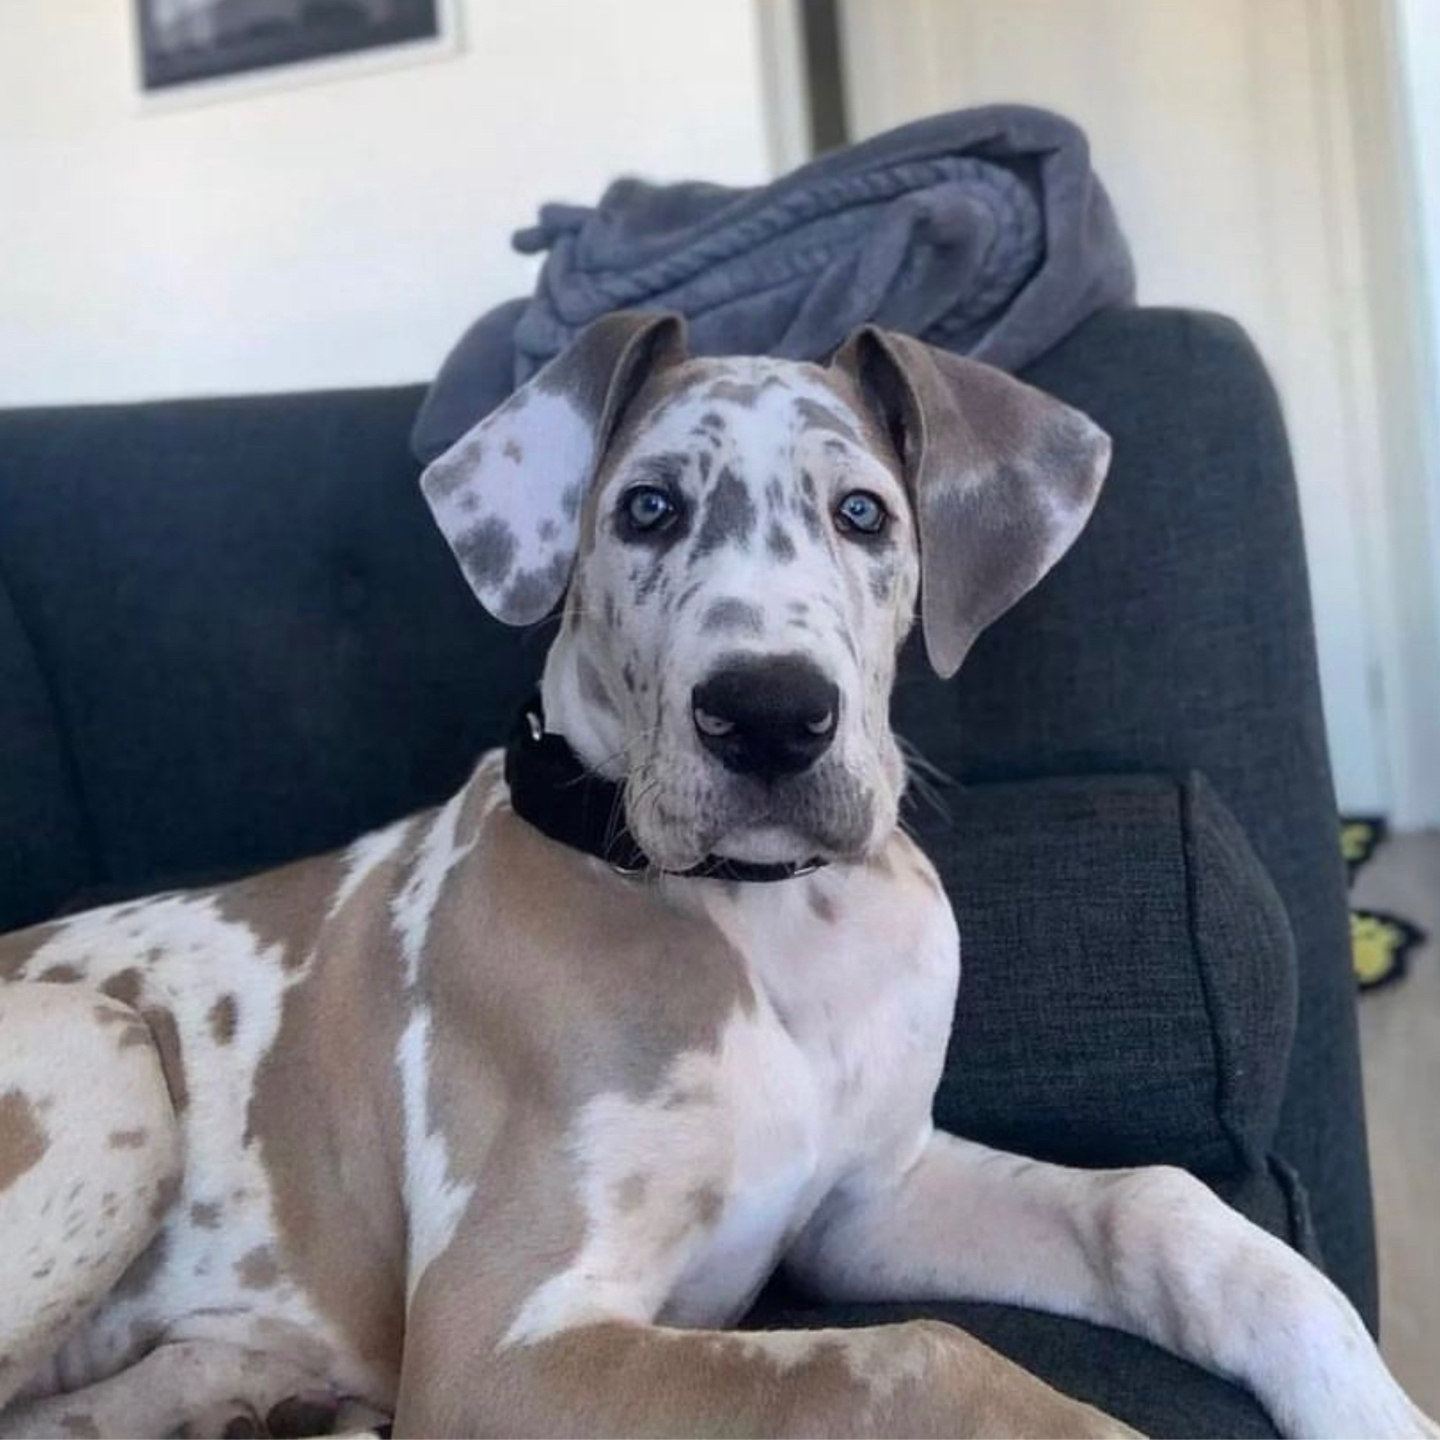 A merle great dane dog on the couch